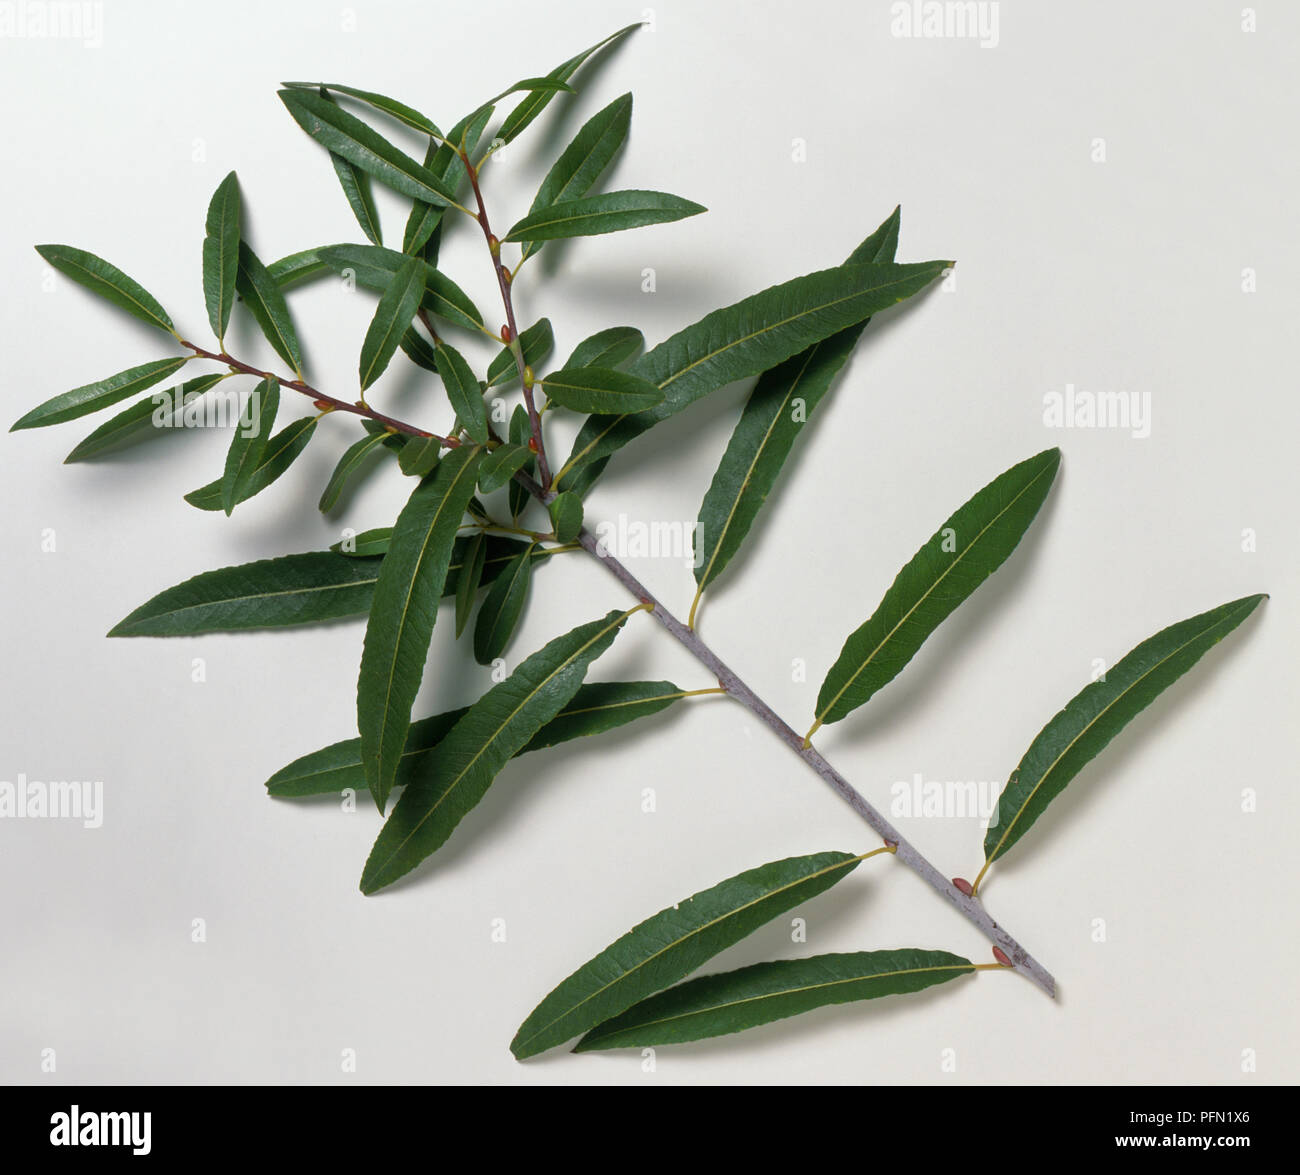 Salix daphnoides 'Aglaia' (Violet willow), branch with leaves, close-up Stock Photo